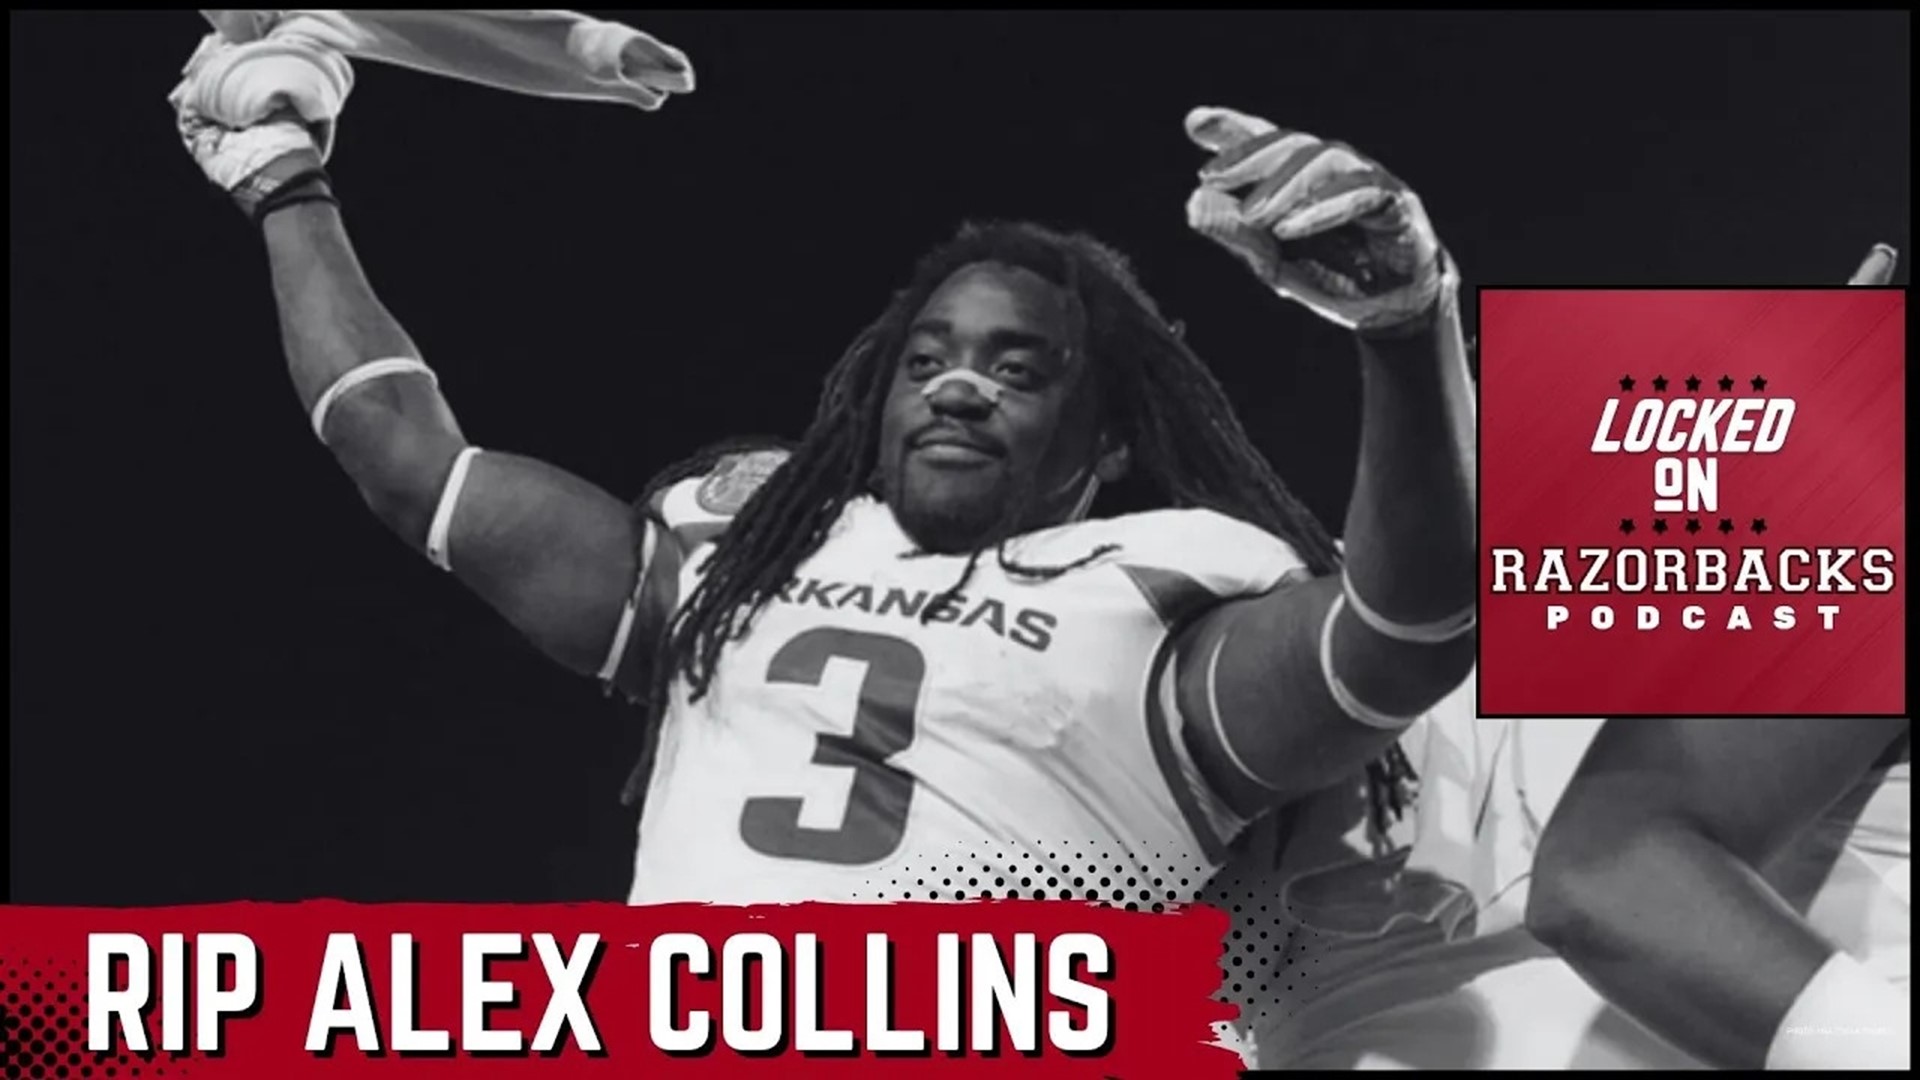 John Nabors reacts & reflects upon the tragic news that former Arkansas RB Alex Collins passes away at the age of 28.